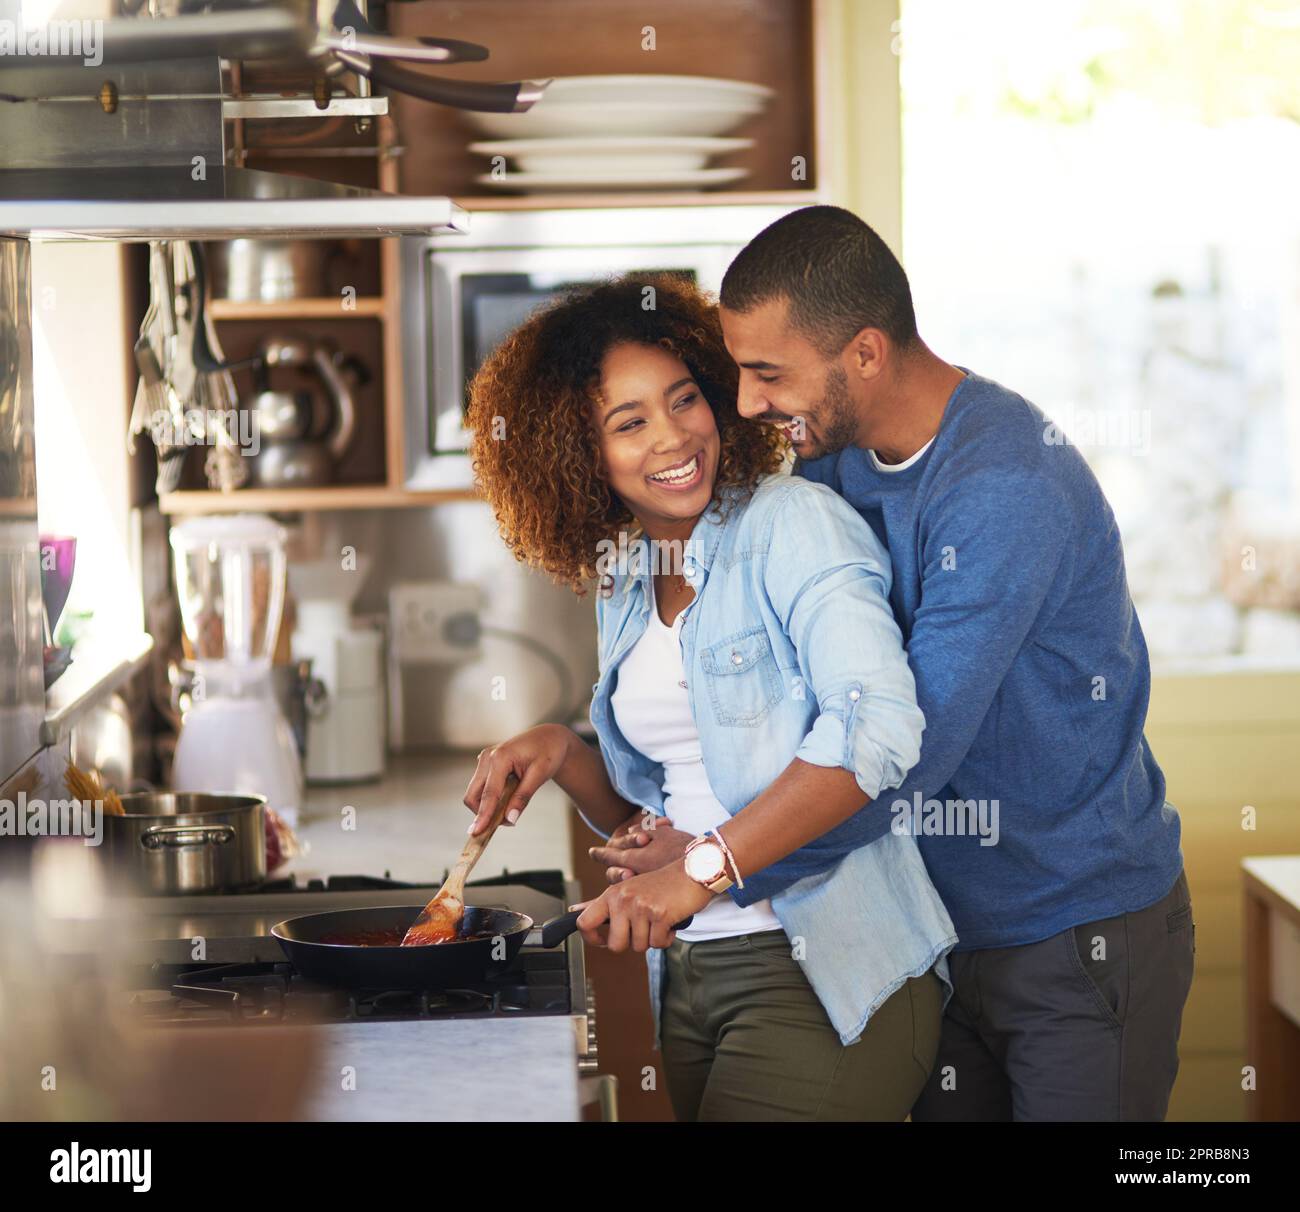 Dinners almost done my love. Shot of a young man hugging his wife while she prepares a meal at home. Stock Photo